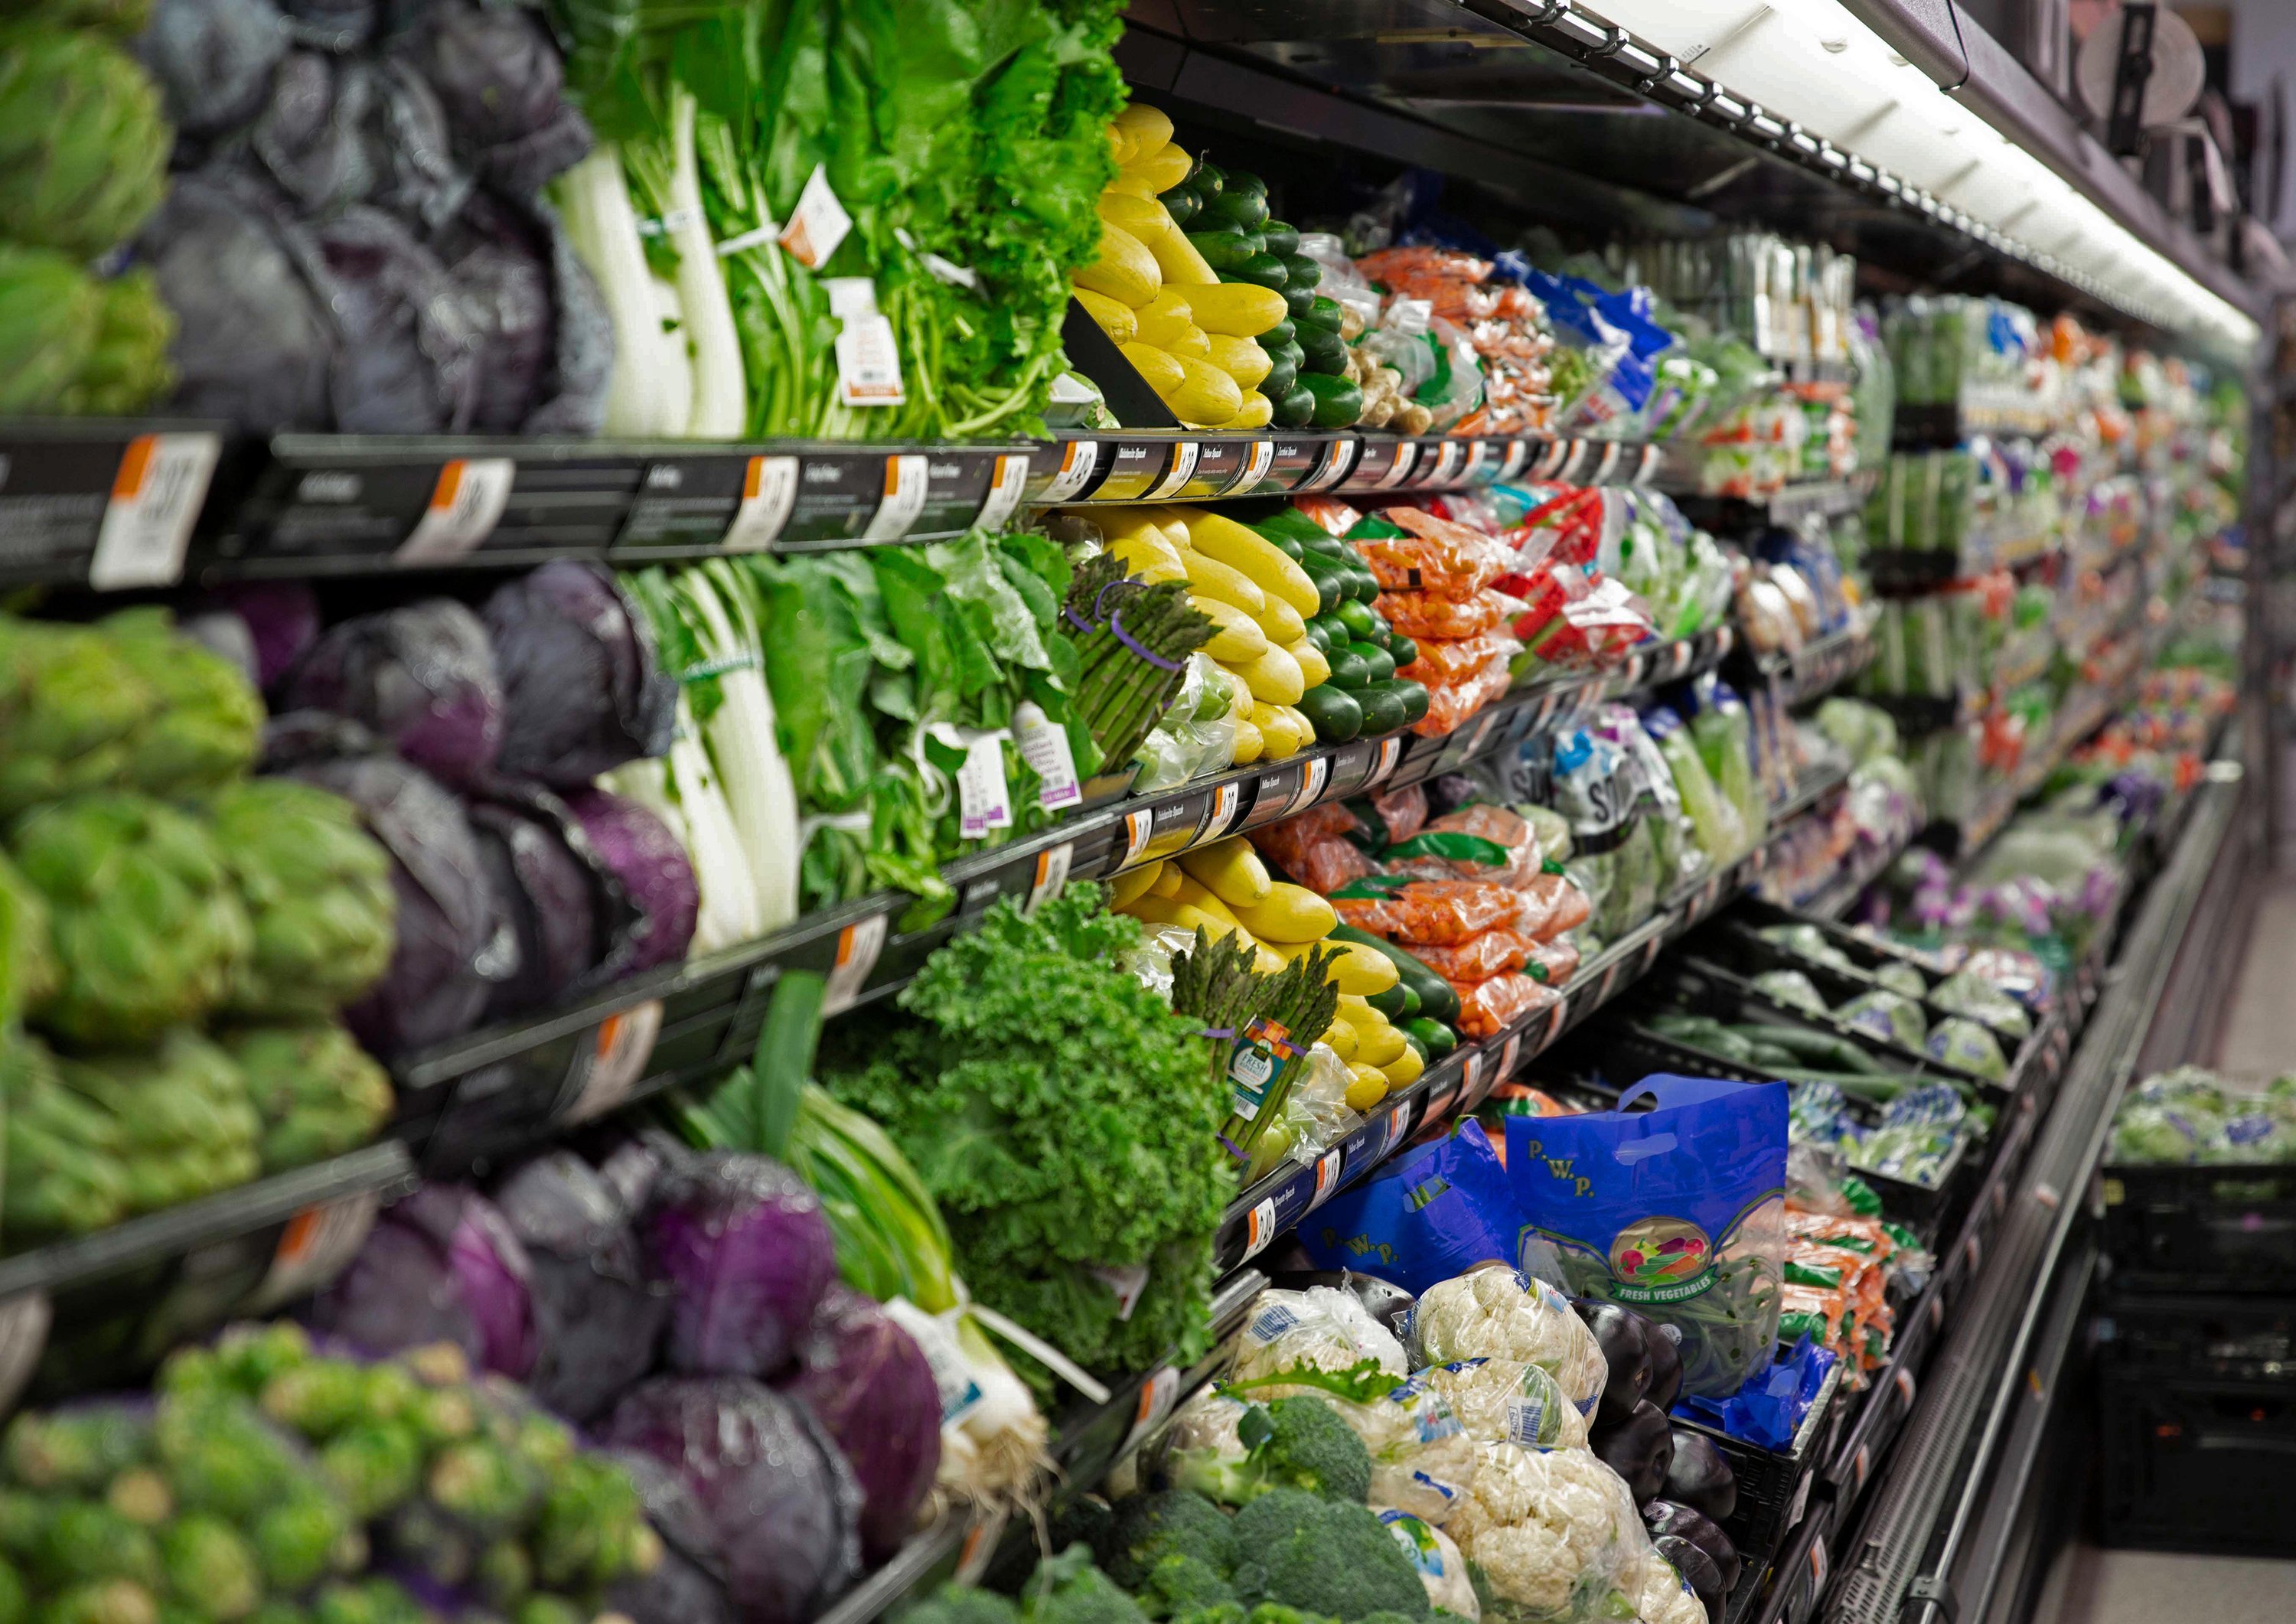 Produce is the first thing customers see when they enter Walmart and a key part of the retailer's defense against Amazon. So Walmart is giving its produce aisles a makeover. (Credit: Walmart)